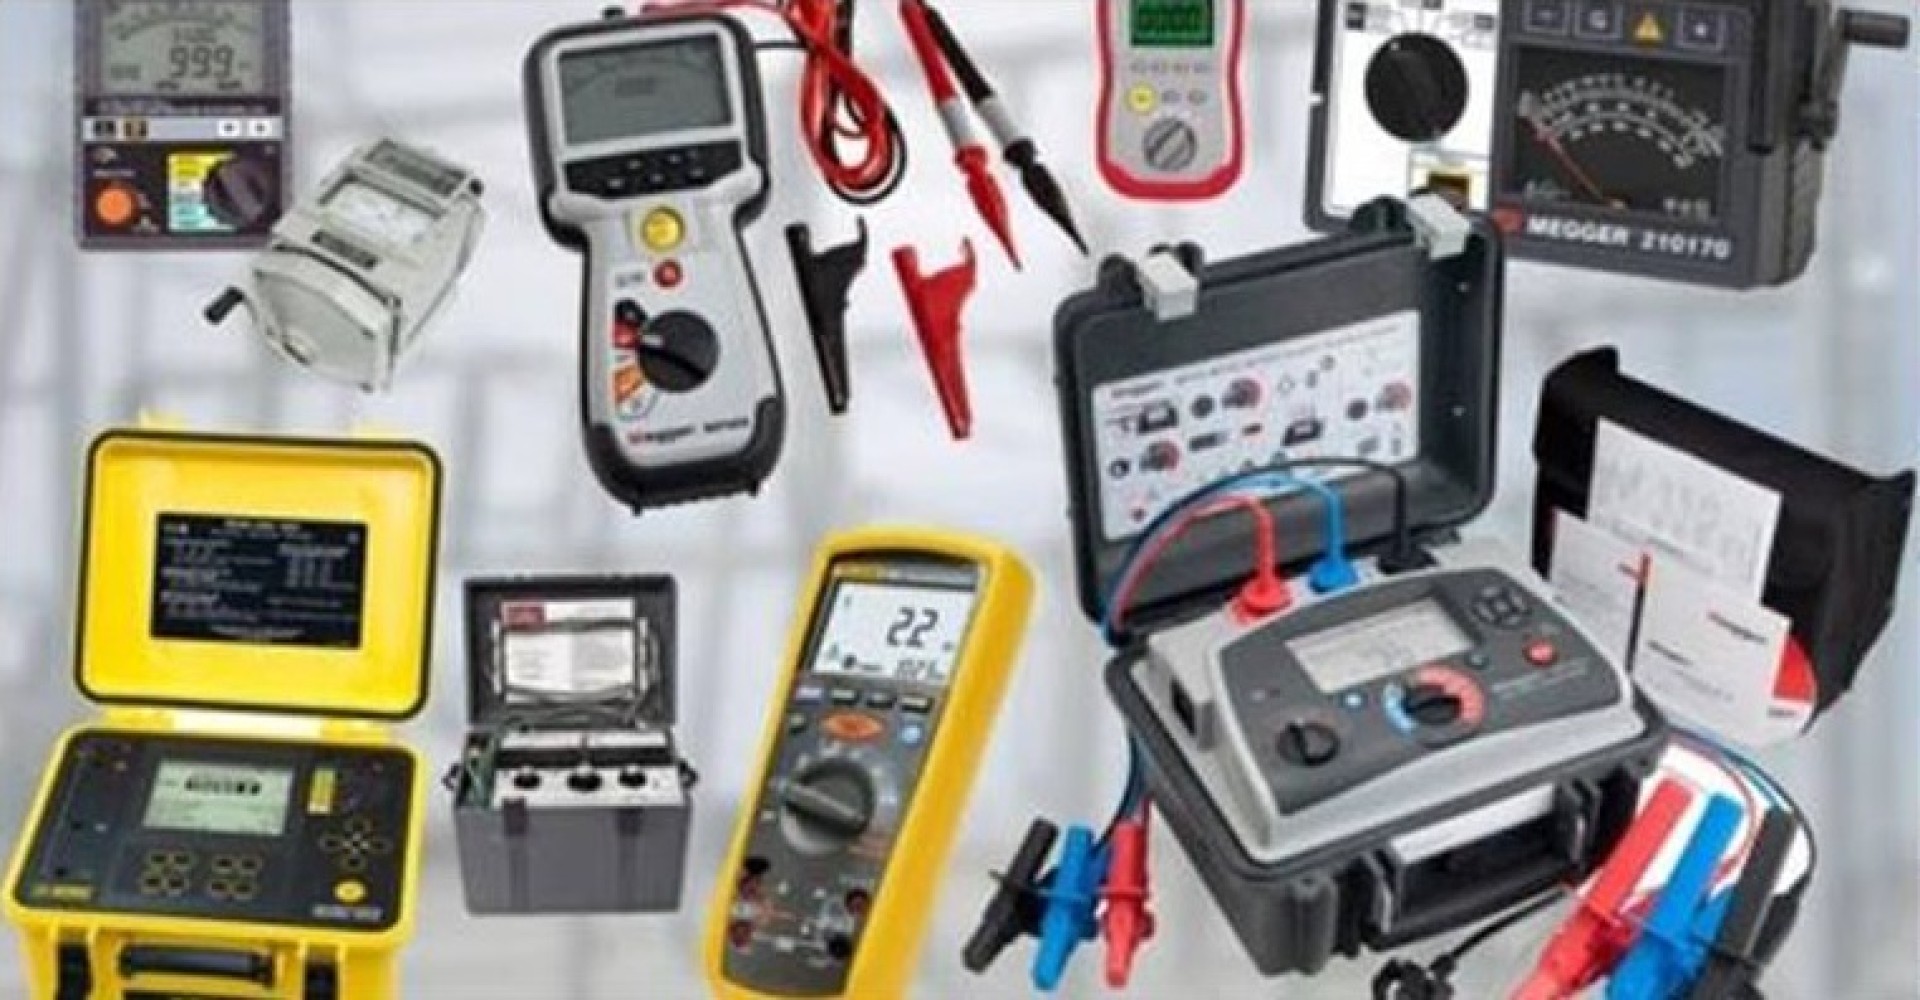 Electrical Measuring and Testing Equipment